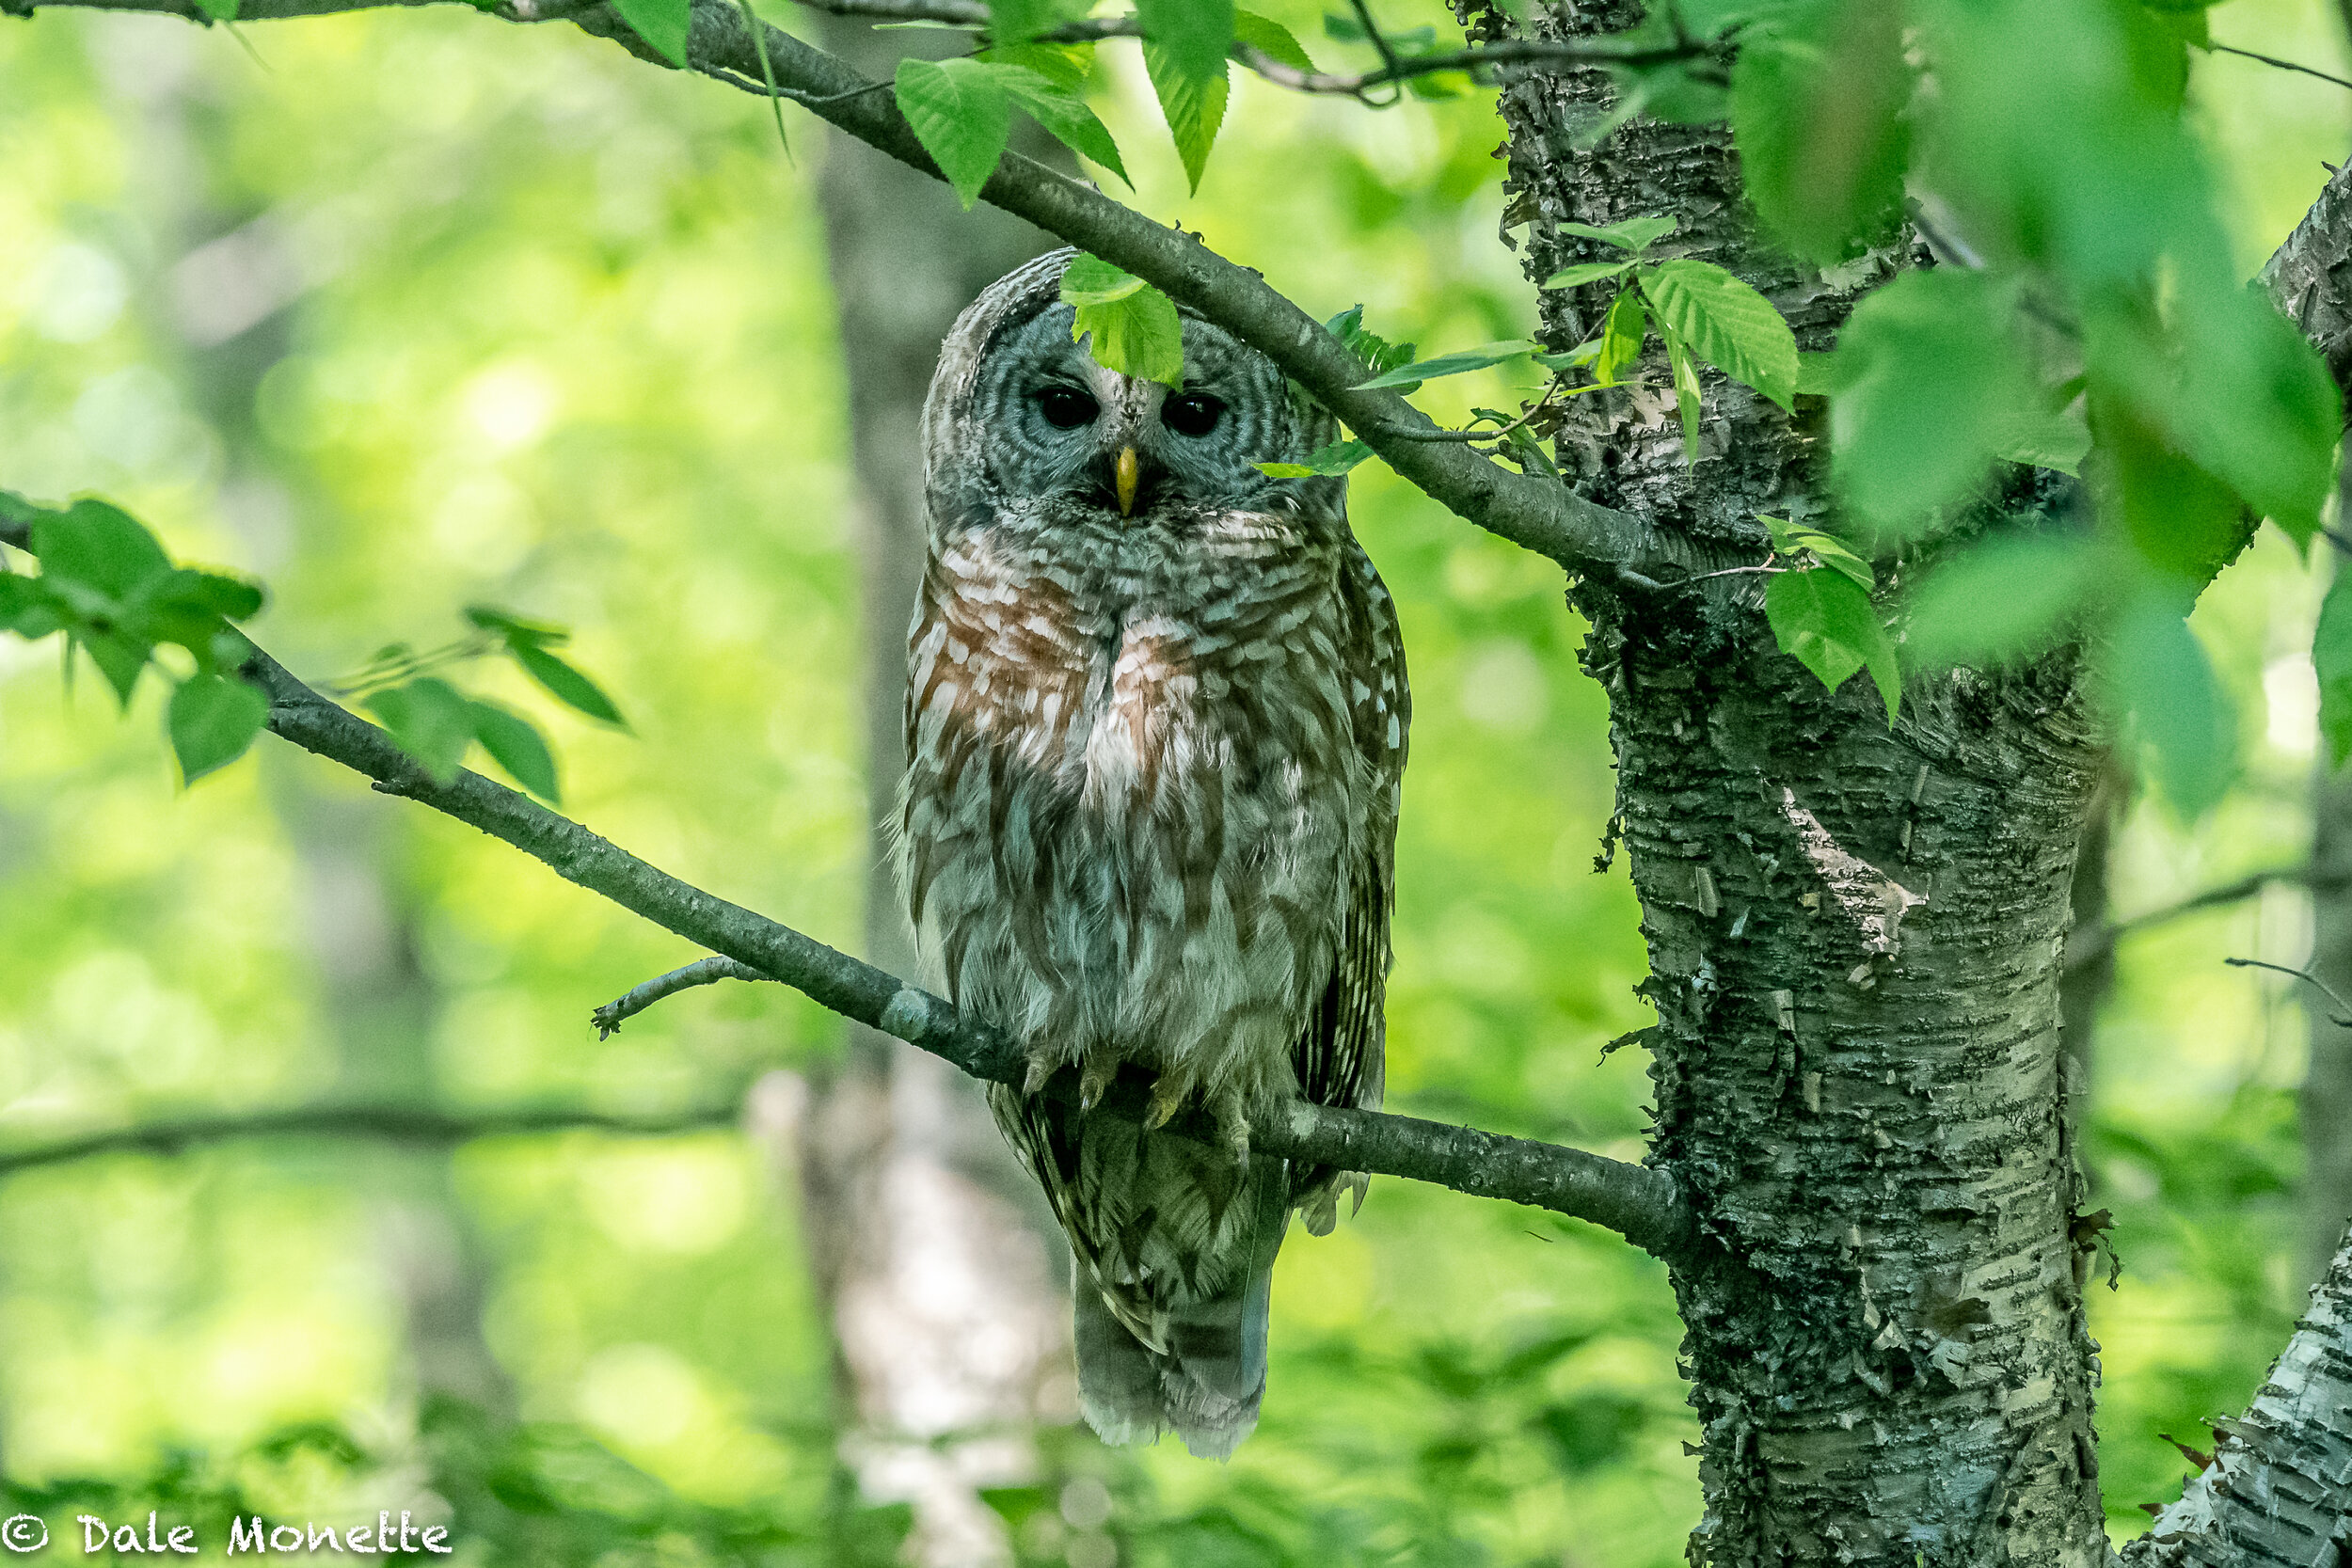   We have a family of barred owls around our house. They wake us up at all hours of the night hooting to each other,  This one was sitting out by the corner of our house late this afternoon.  